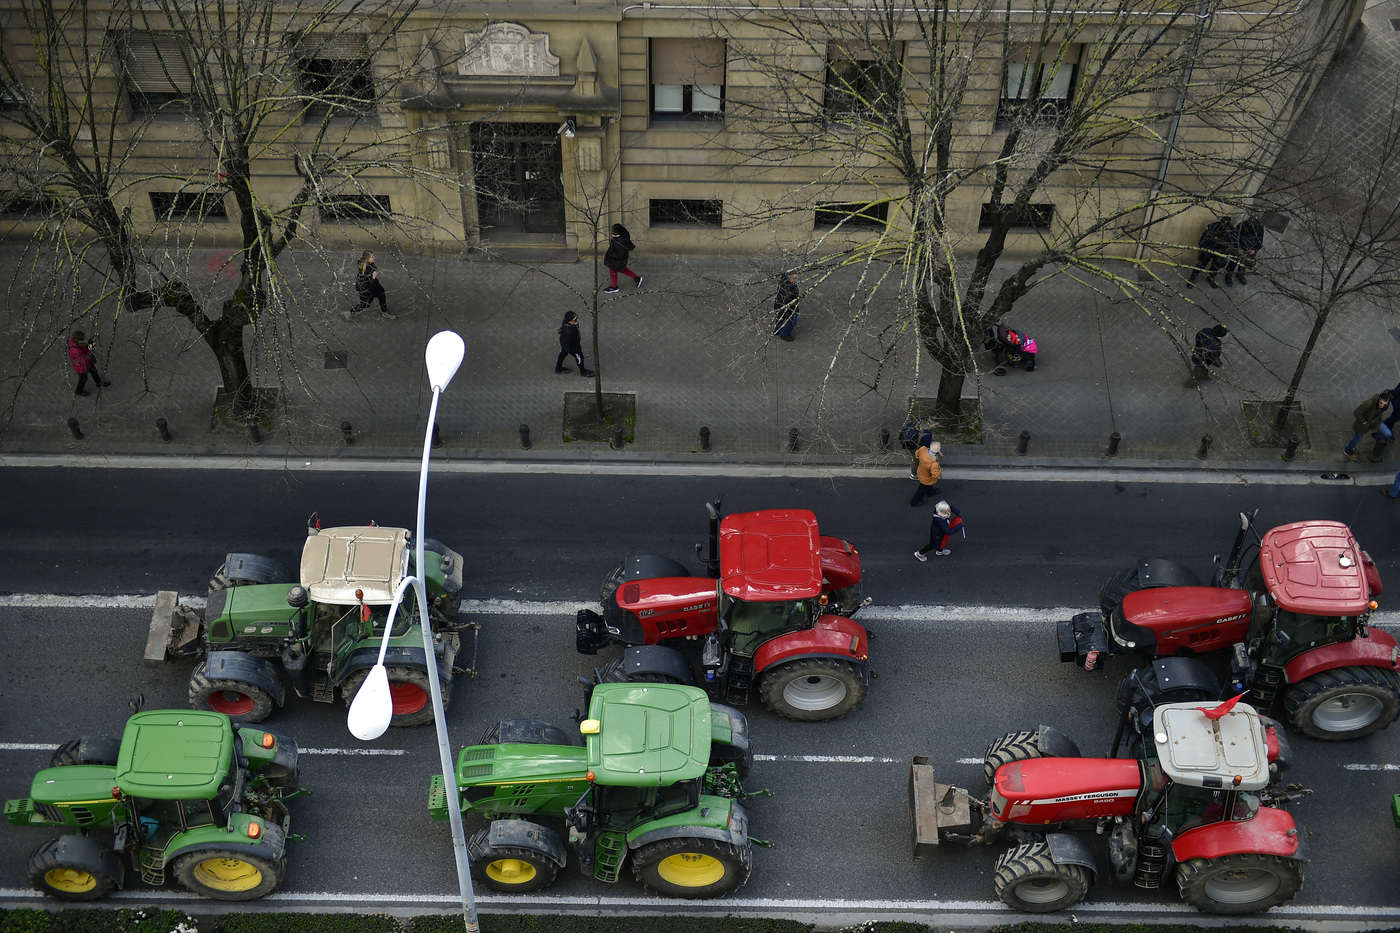 Farmers block the center of the city with their tractors during a protest in Pamplona, northern Spain, Wednesday, Feb. 19, 2020. Farmers across Spain are taking part in mass protests over what they say are plummeting incomes for agricultural workers. (AP Photo/Alvaro Barrientos)